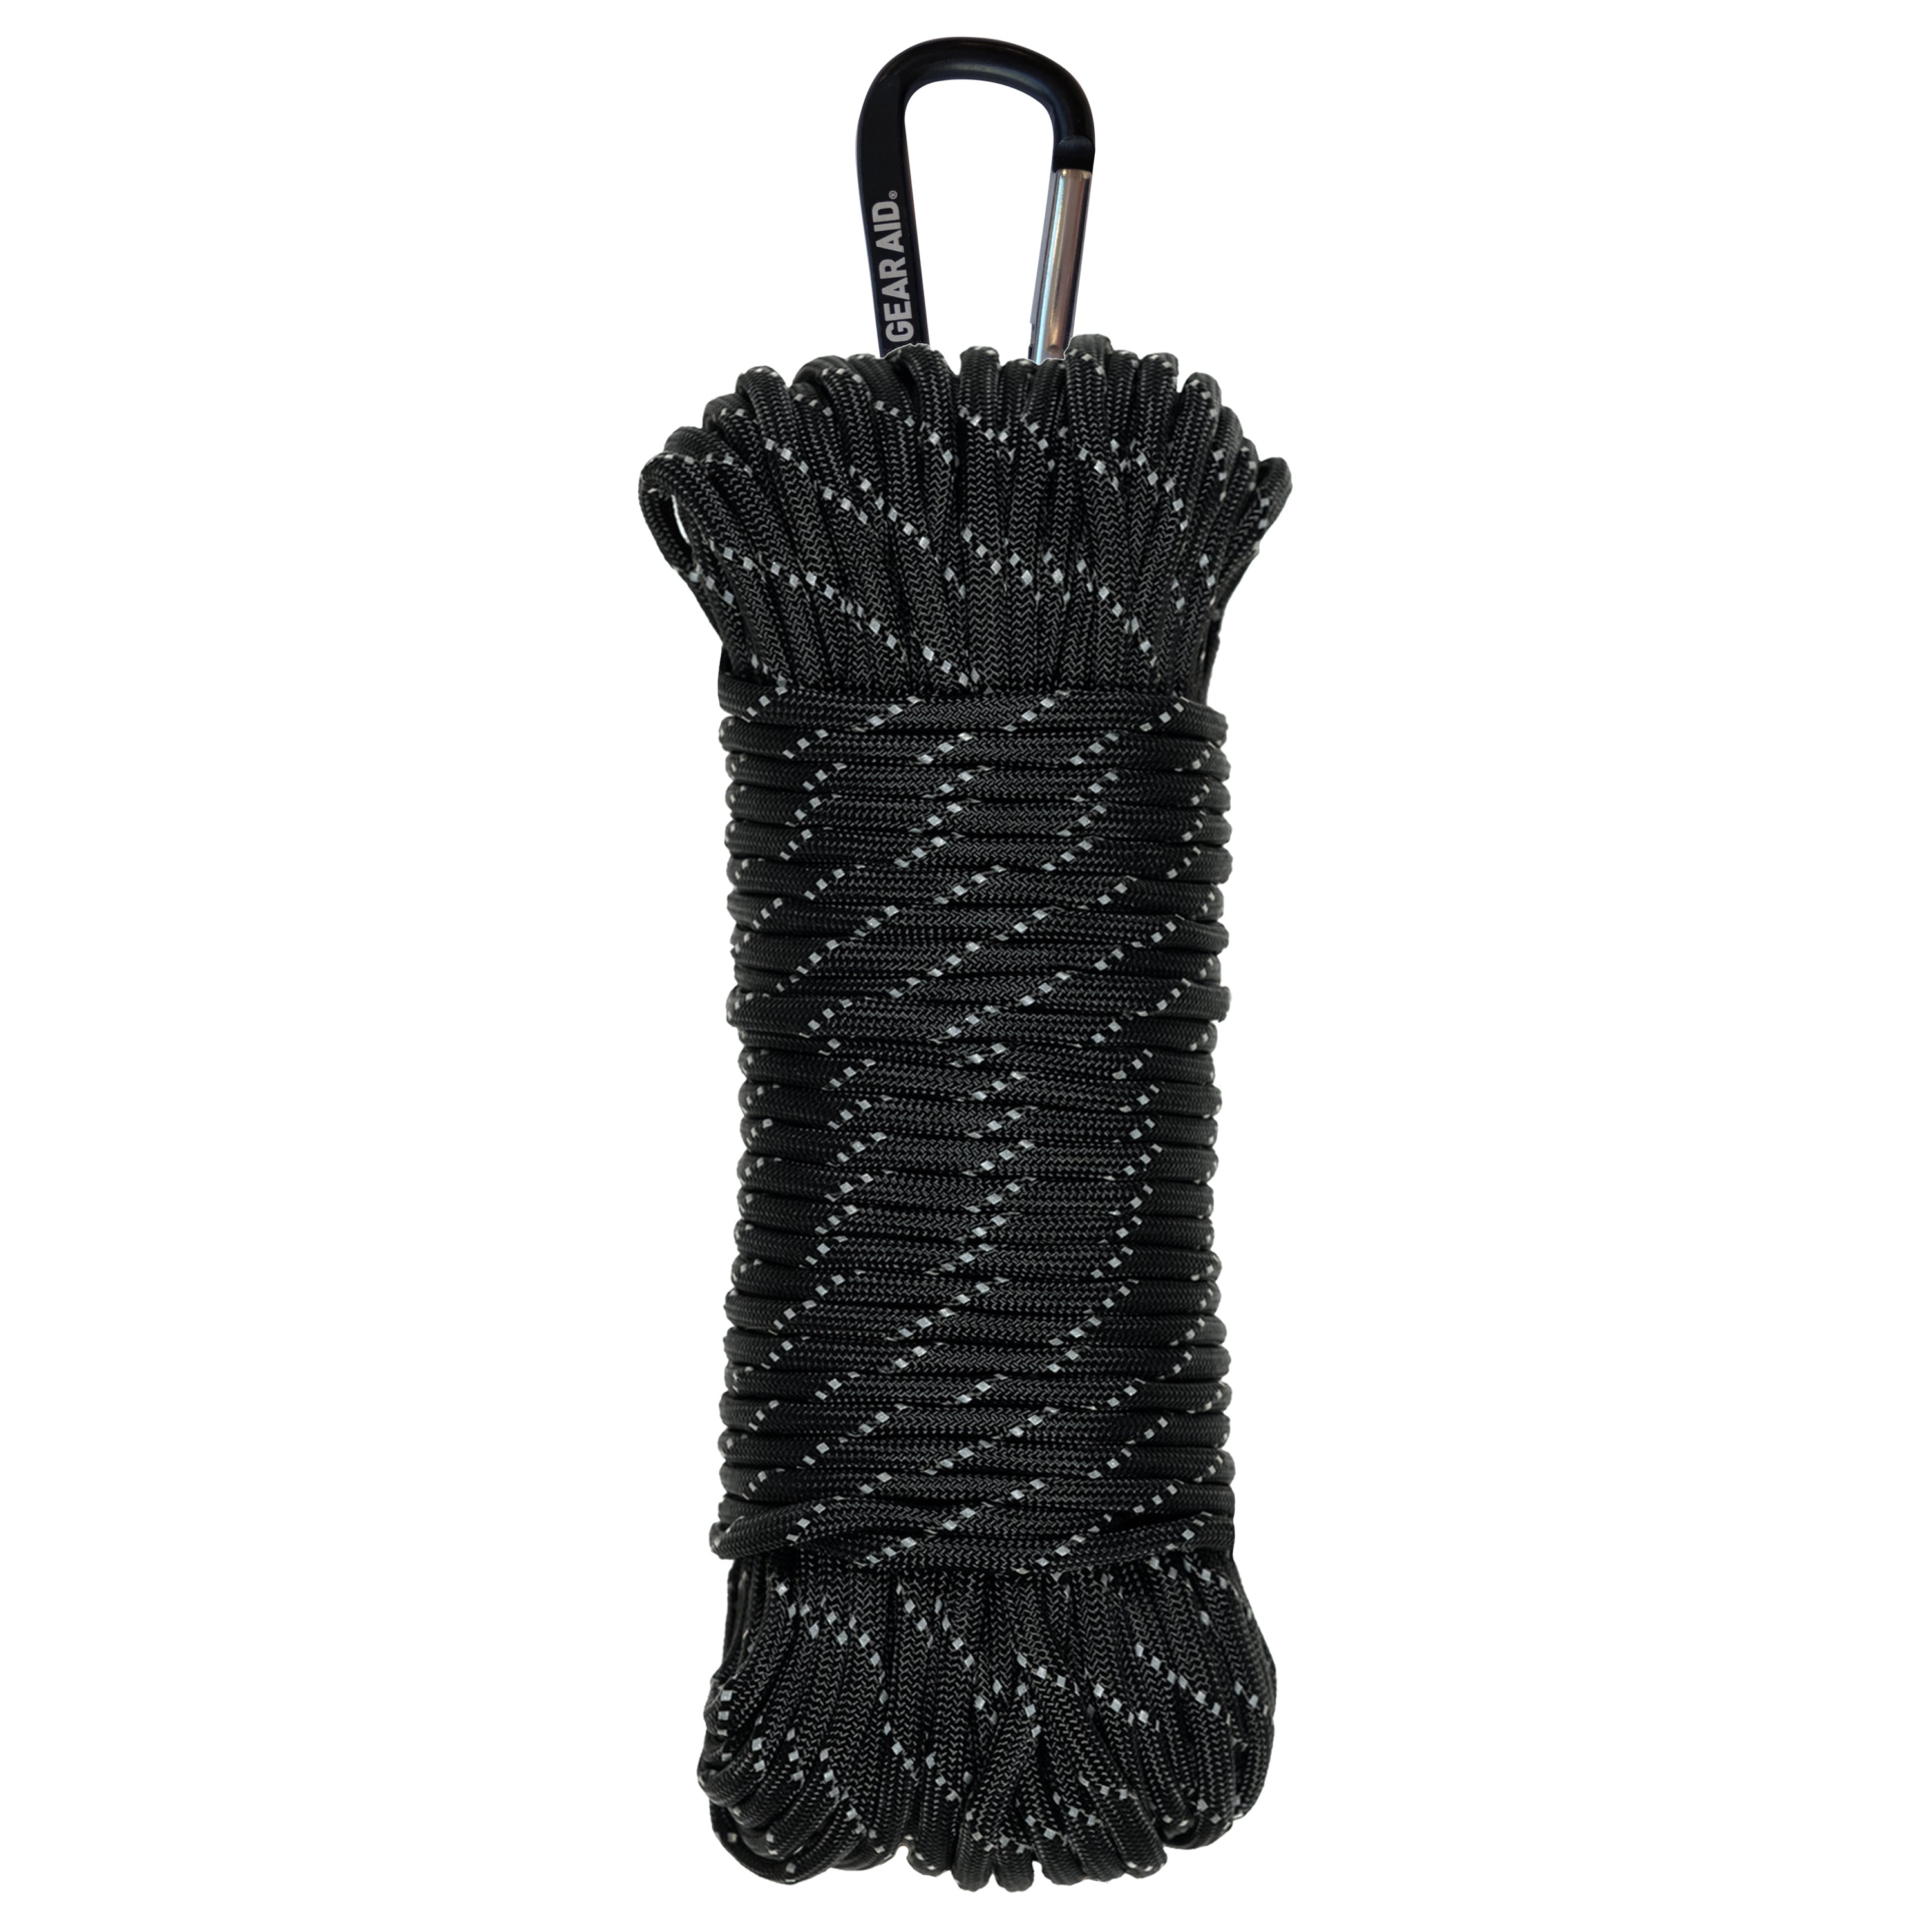 Reflective Paracord Cord 30M Length, 6mm Thickness, Ideal For